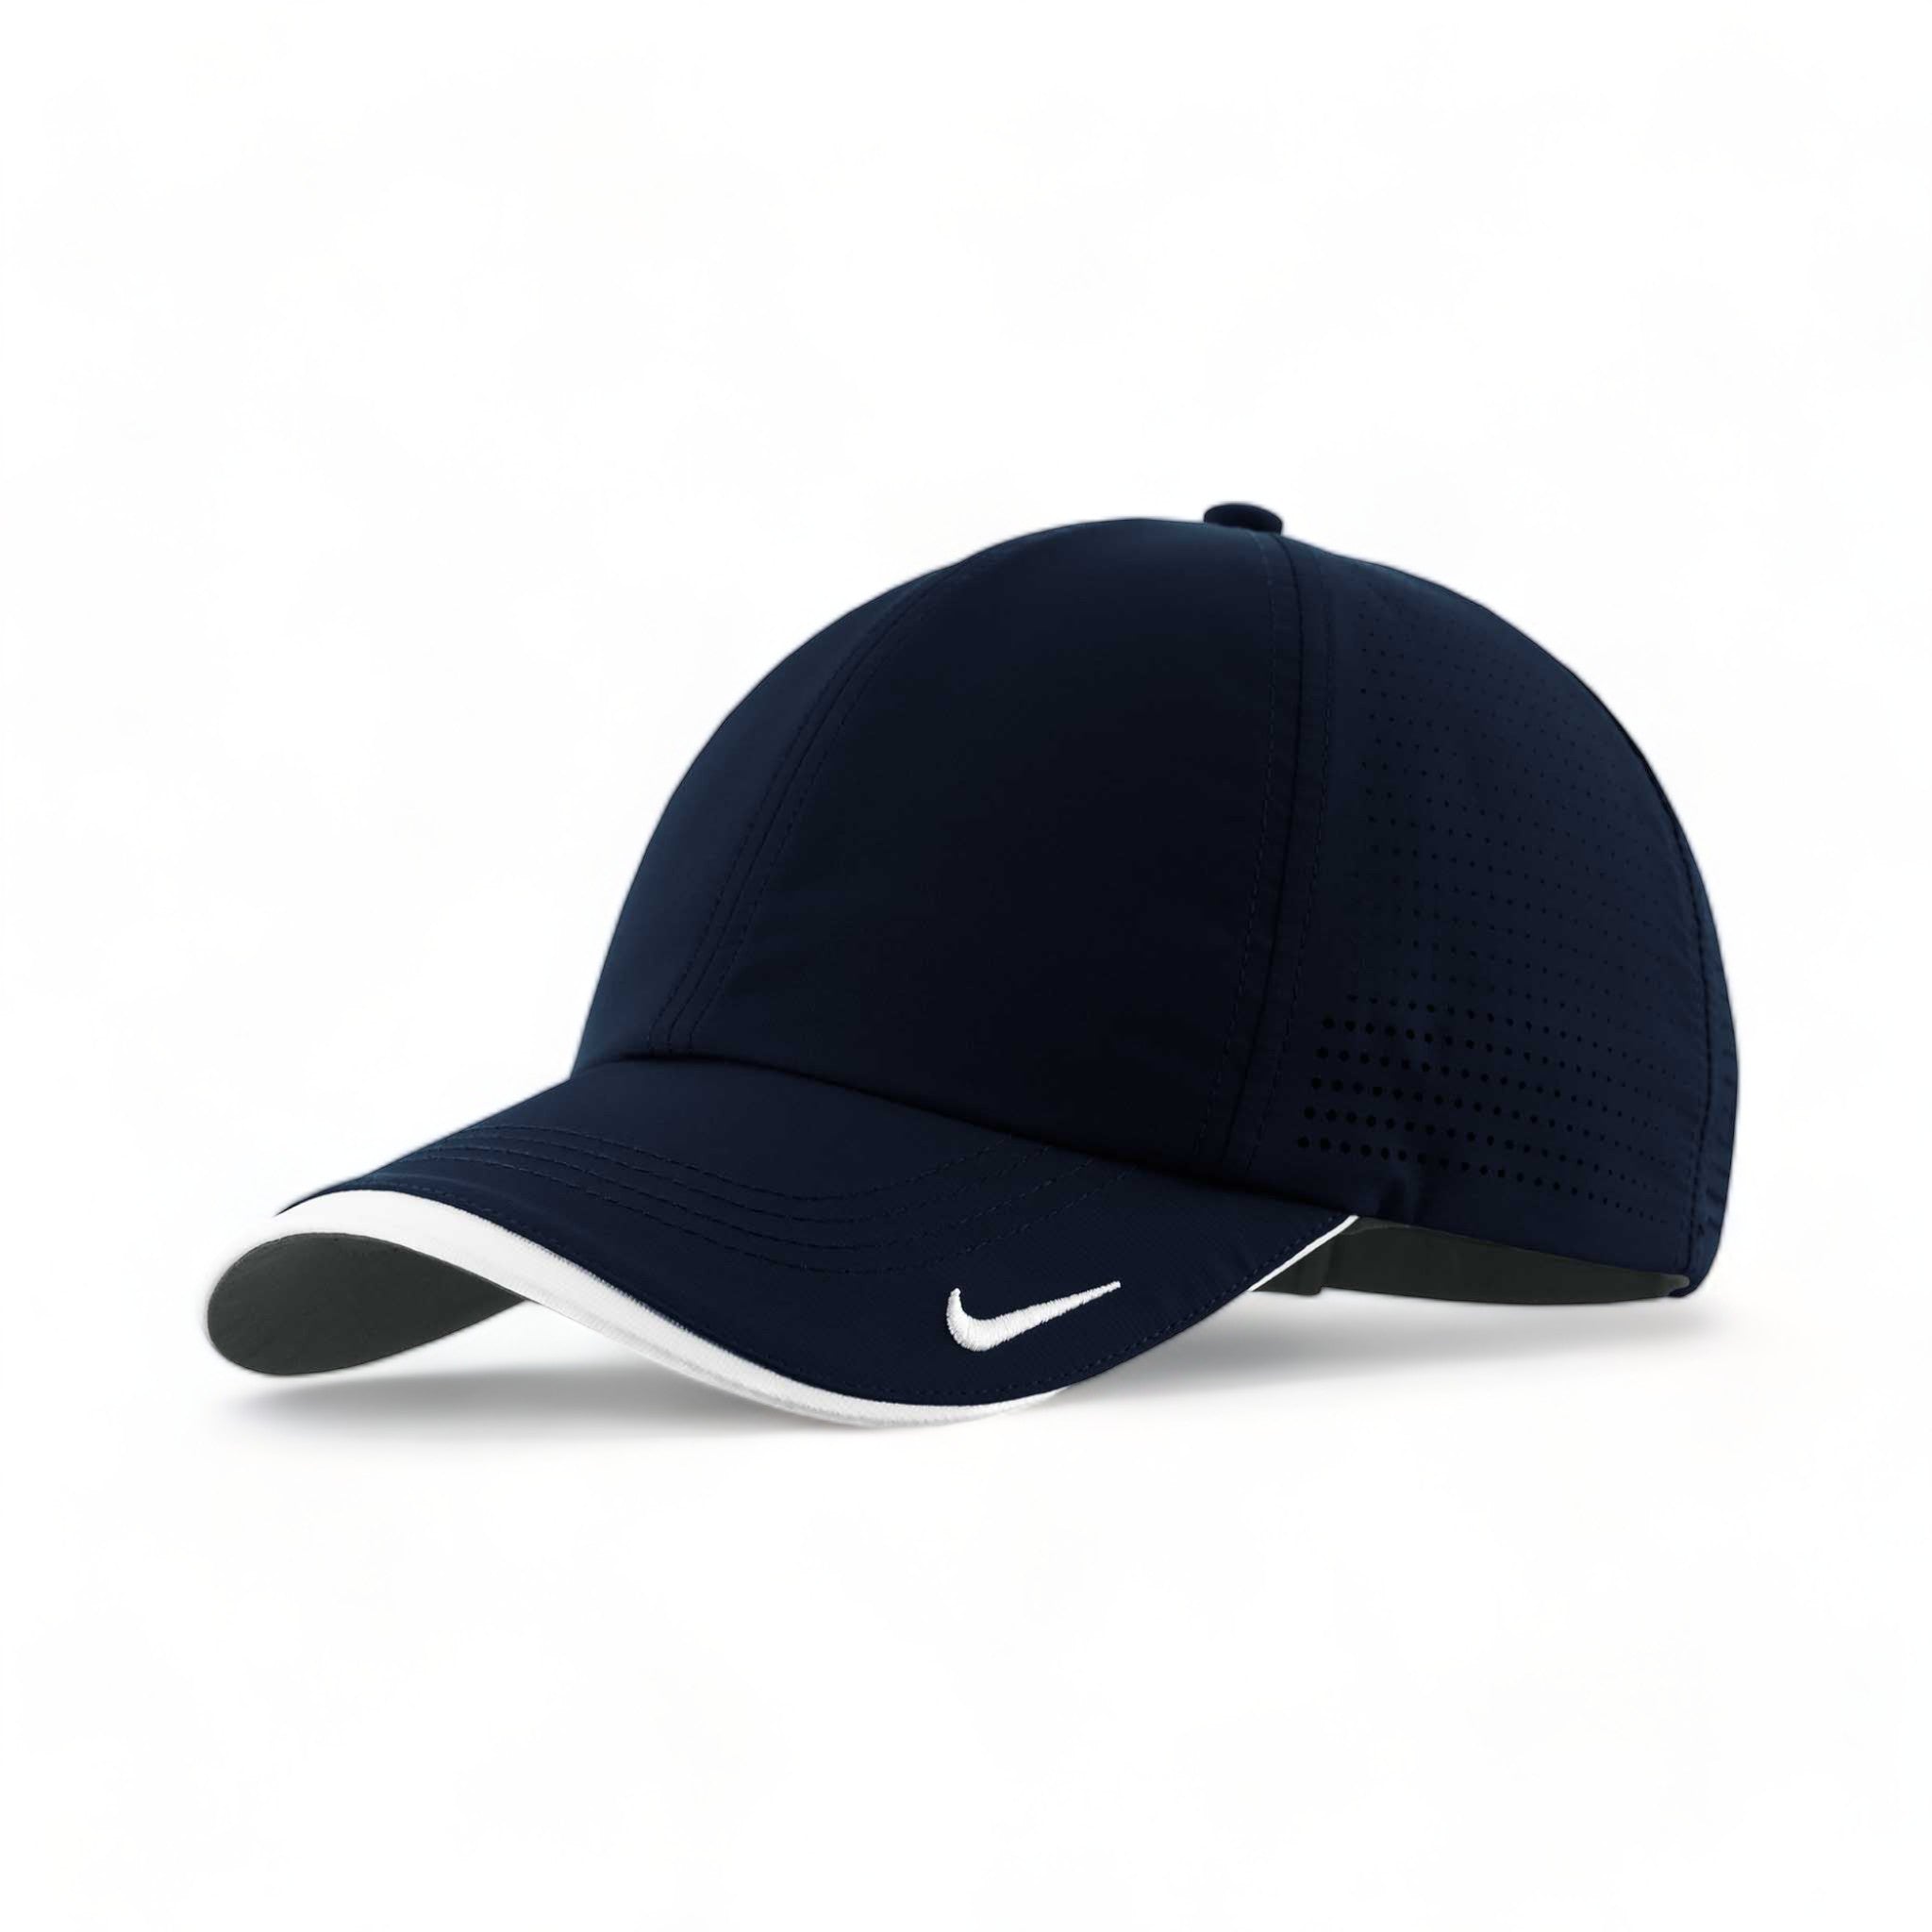 Side view of Nike NKFB6445 custom hat in navy and white